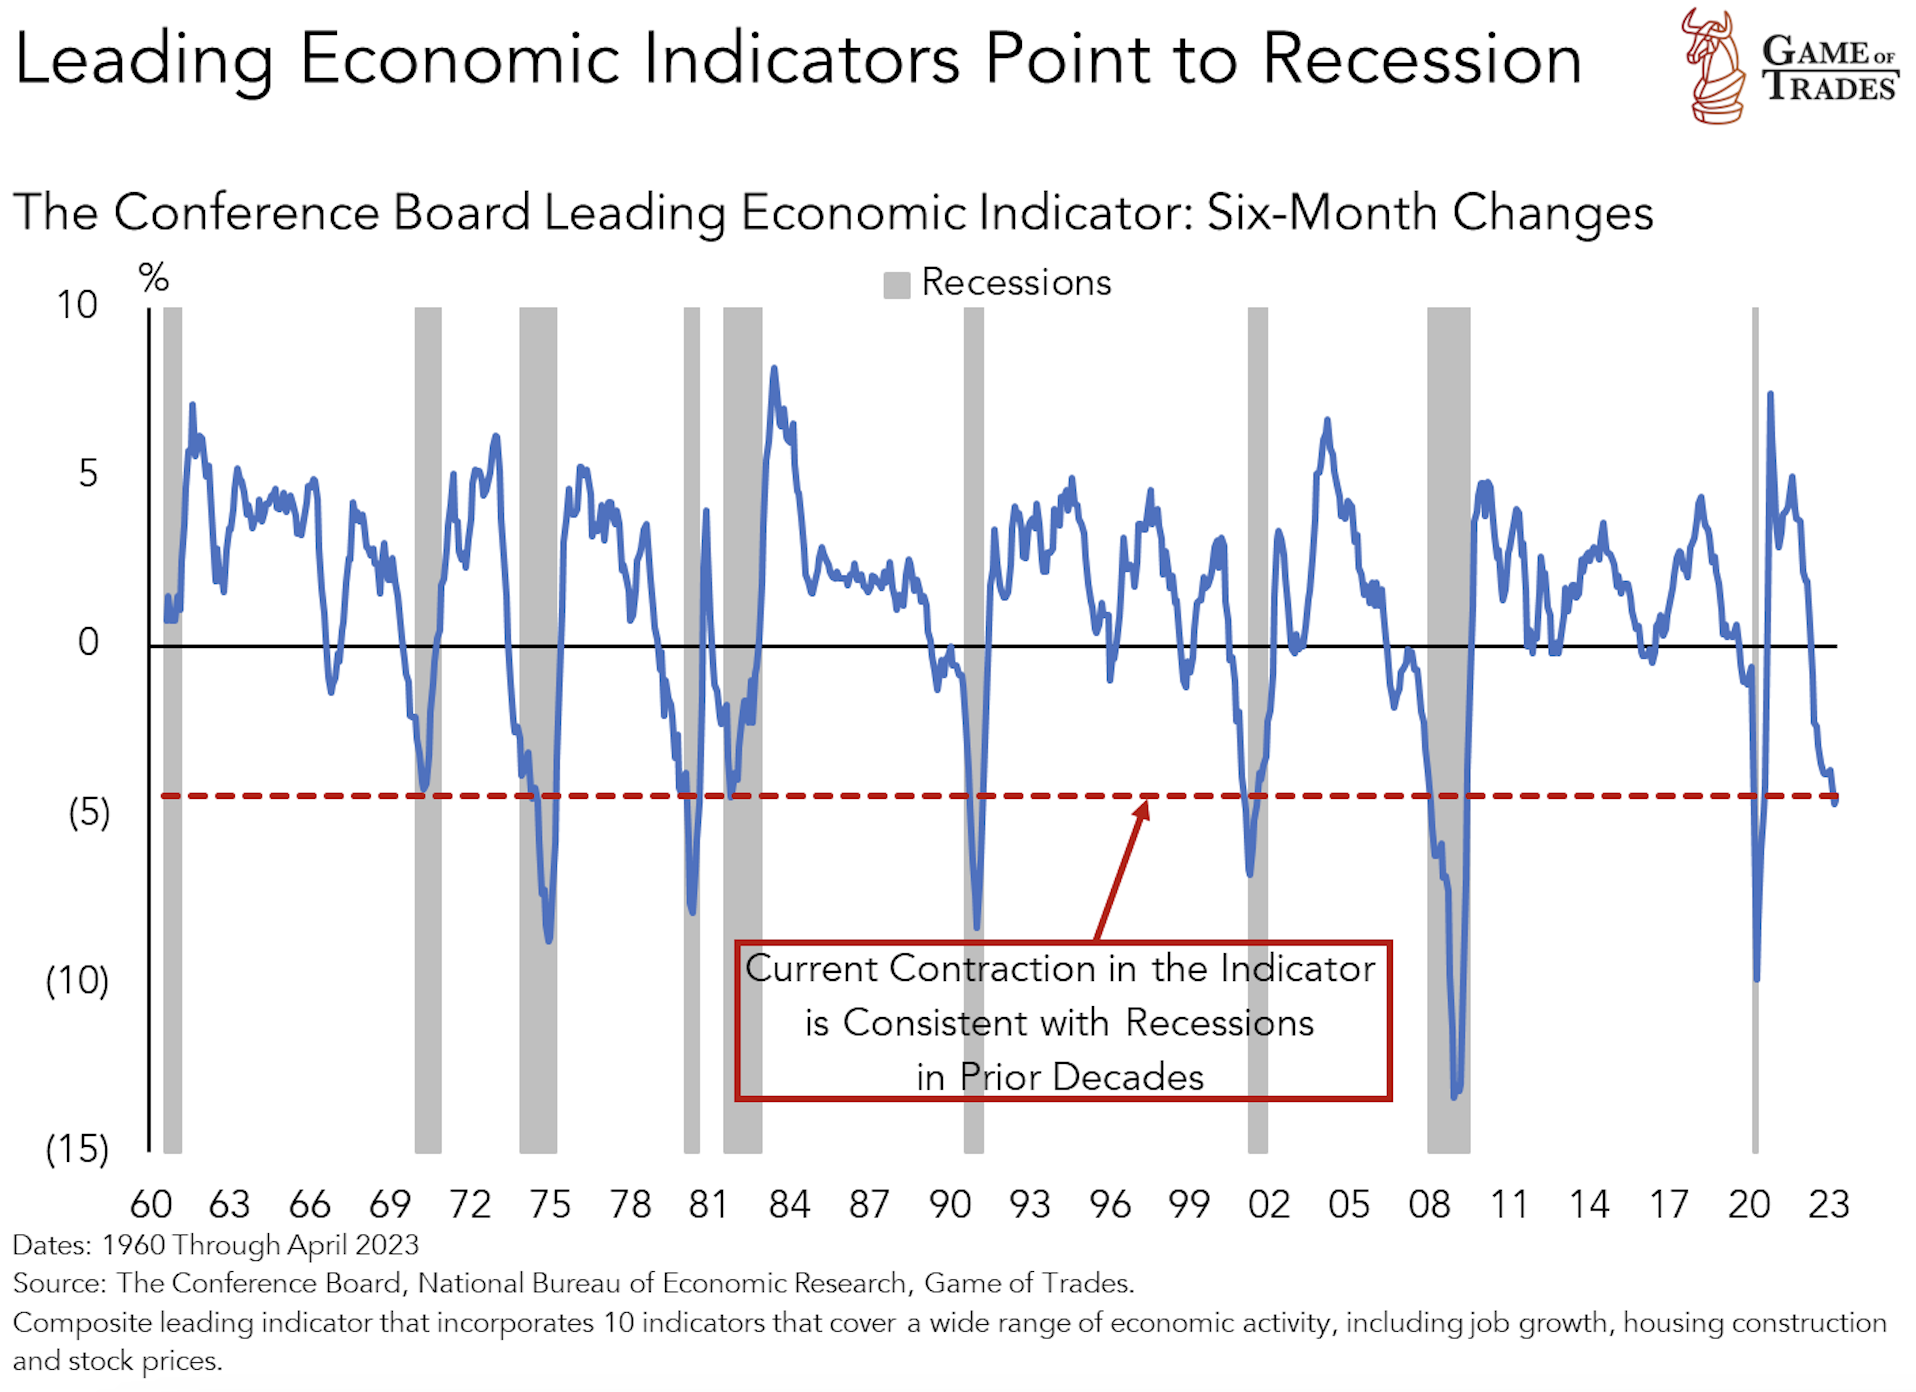 The Conference Board Leading Economic Indicator